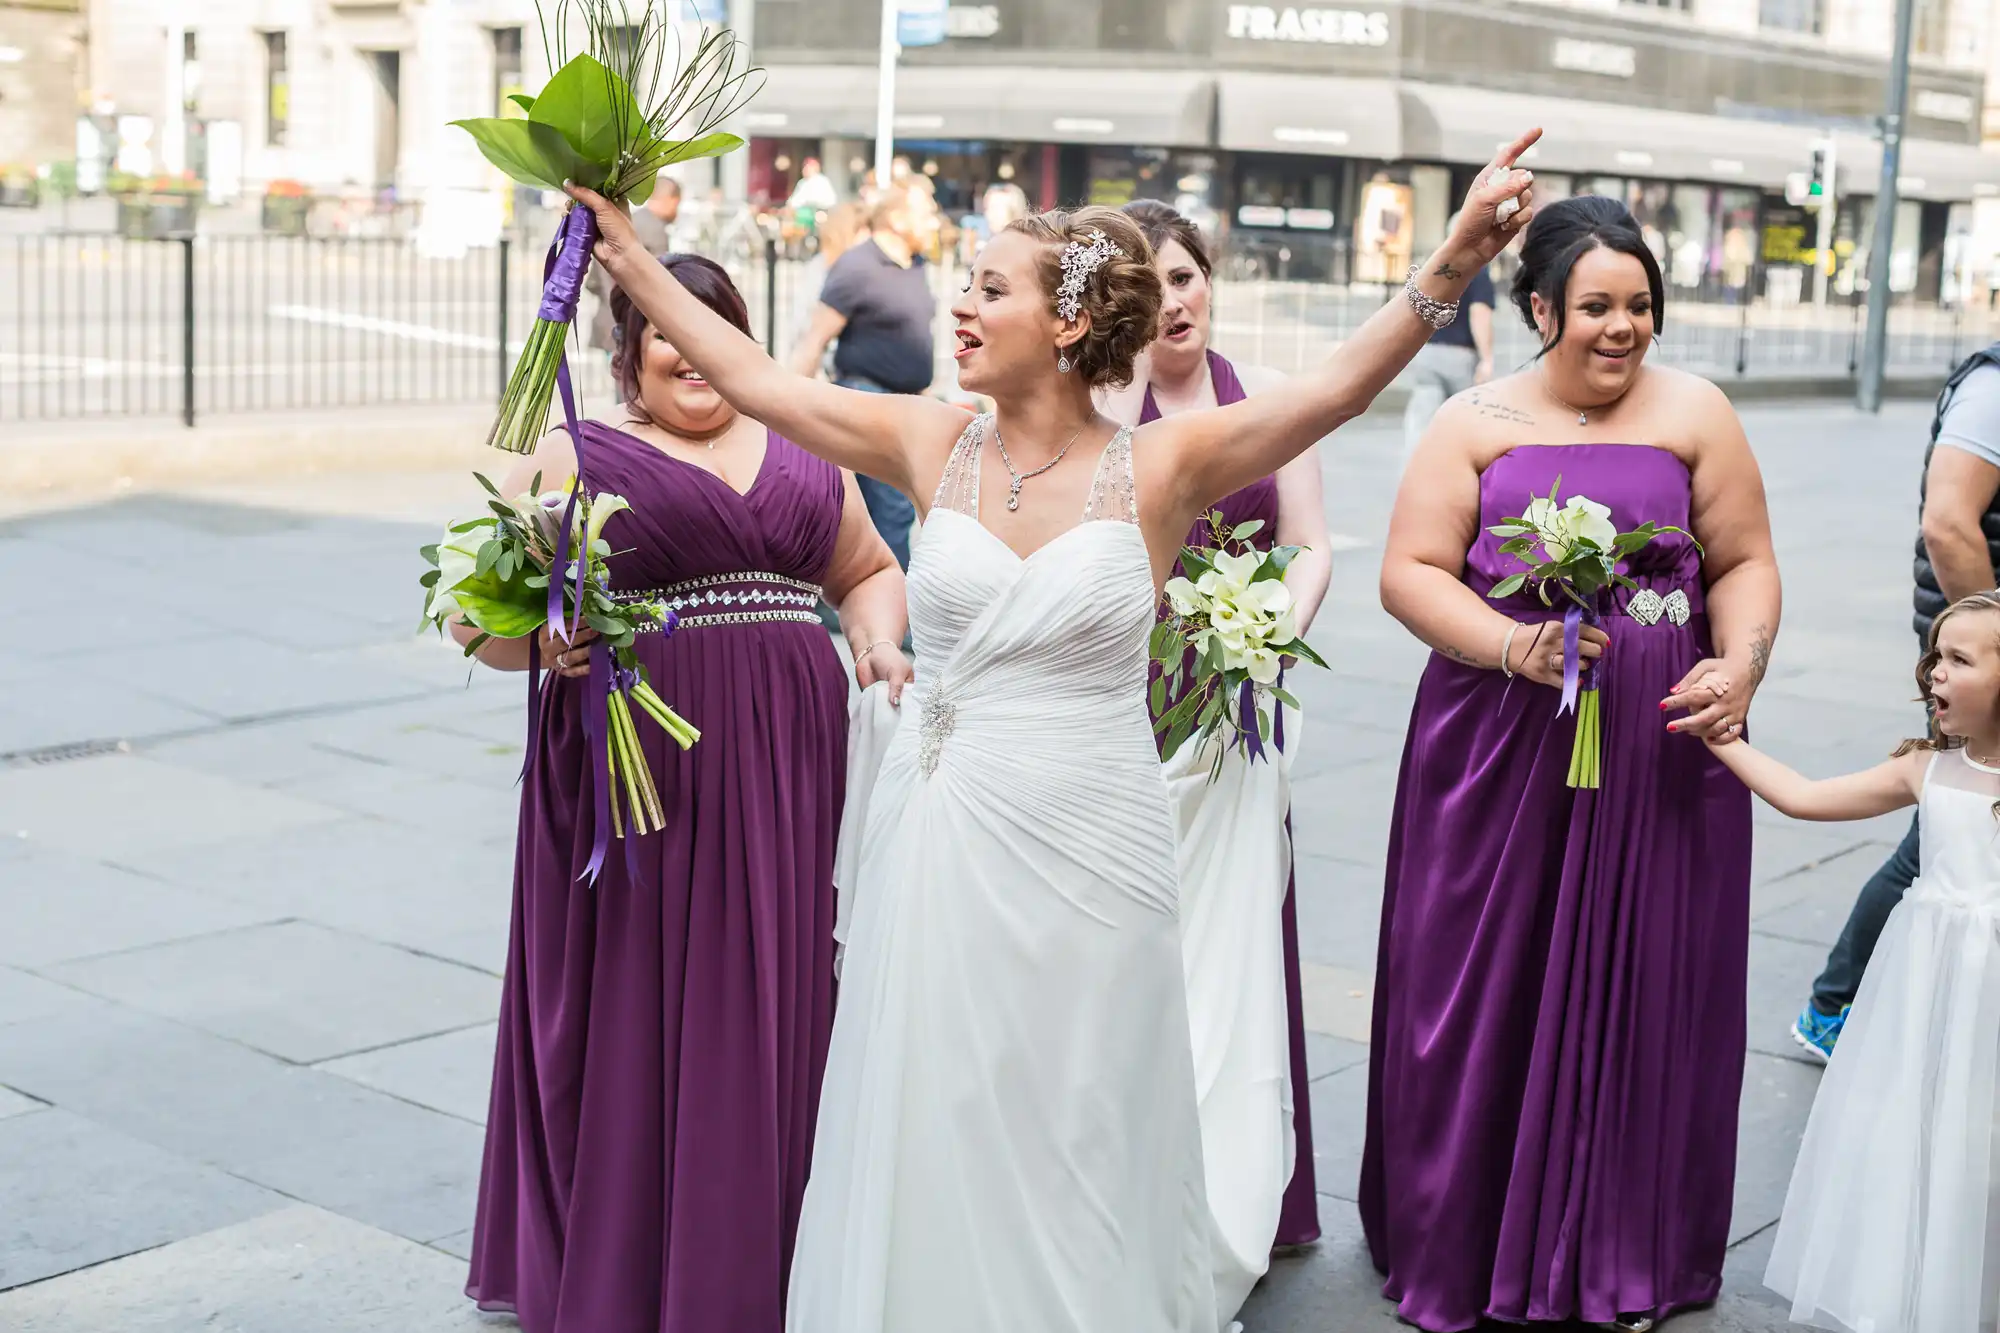 A bride in a white dress and three bridesmaids in purple dresses joyfully walking on a city street, holding bouquets.